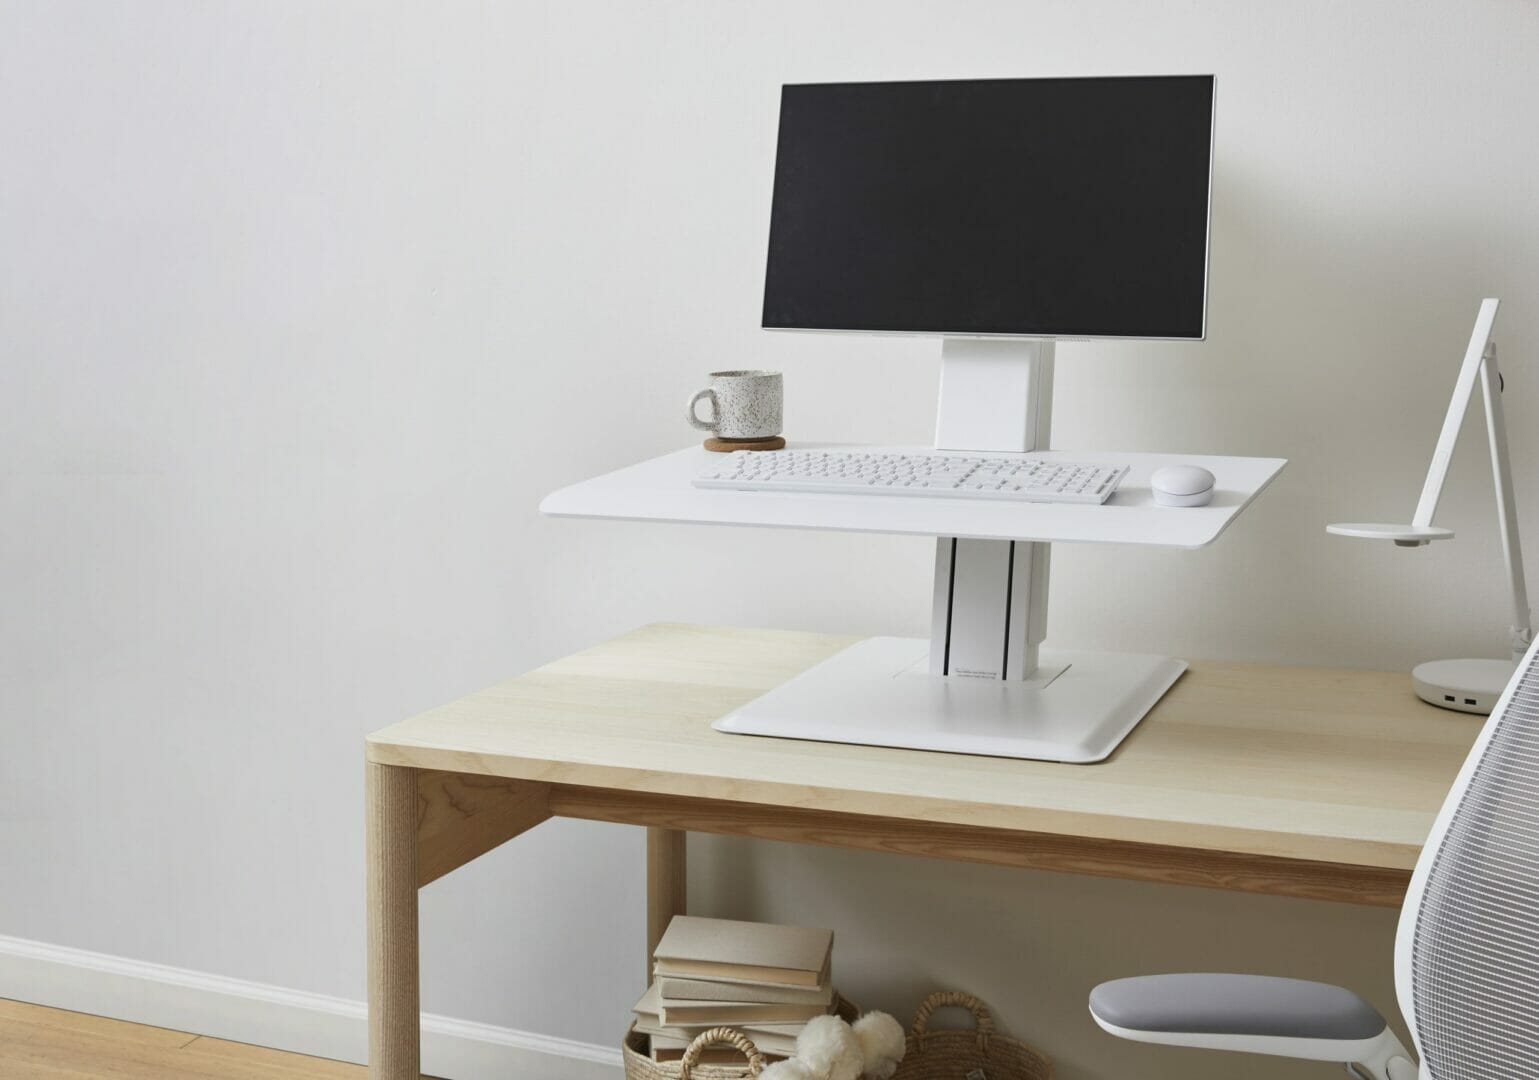 Create an Ergonomic Working Environment in any part of Your Home